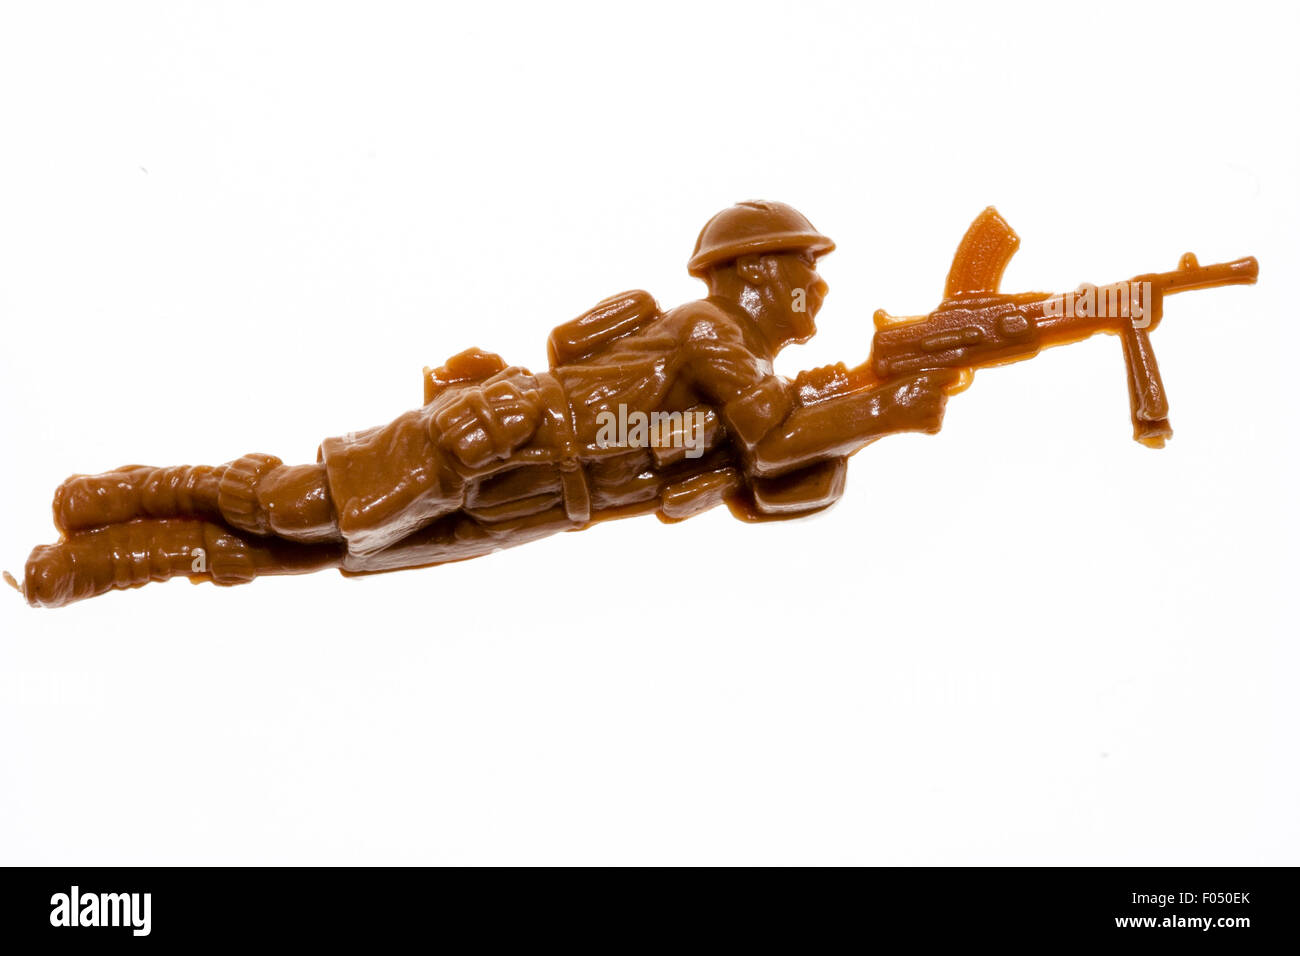 Matchbox HO/00 scale model toy figure. 8th Army world war two soldier laying down firing Bern gun. Figure on plain white background. Stock Photo